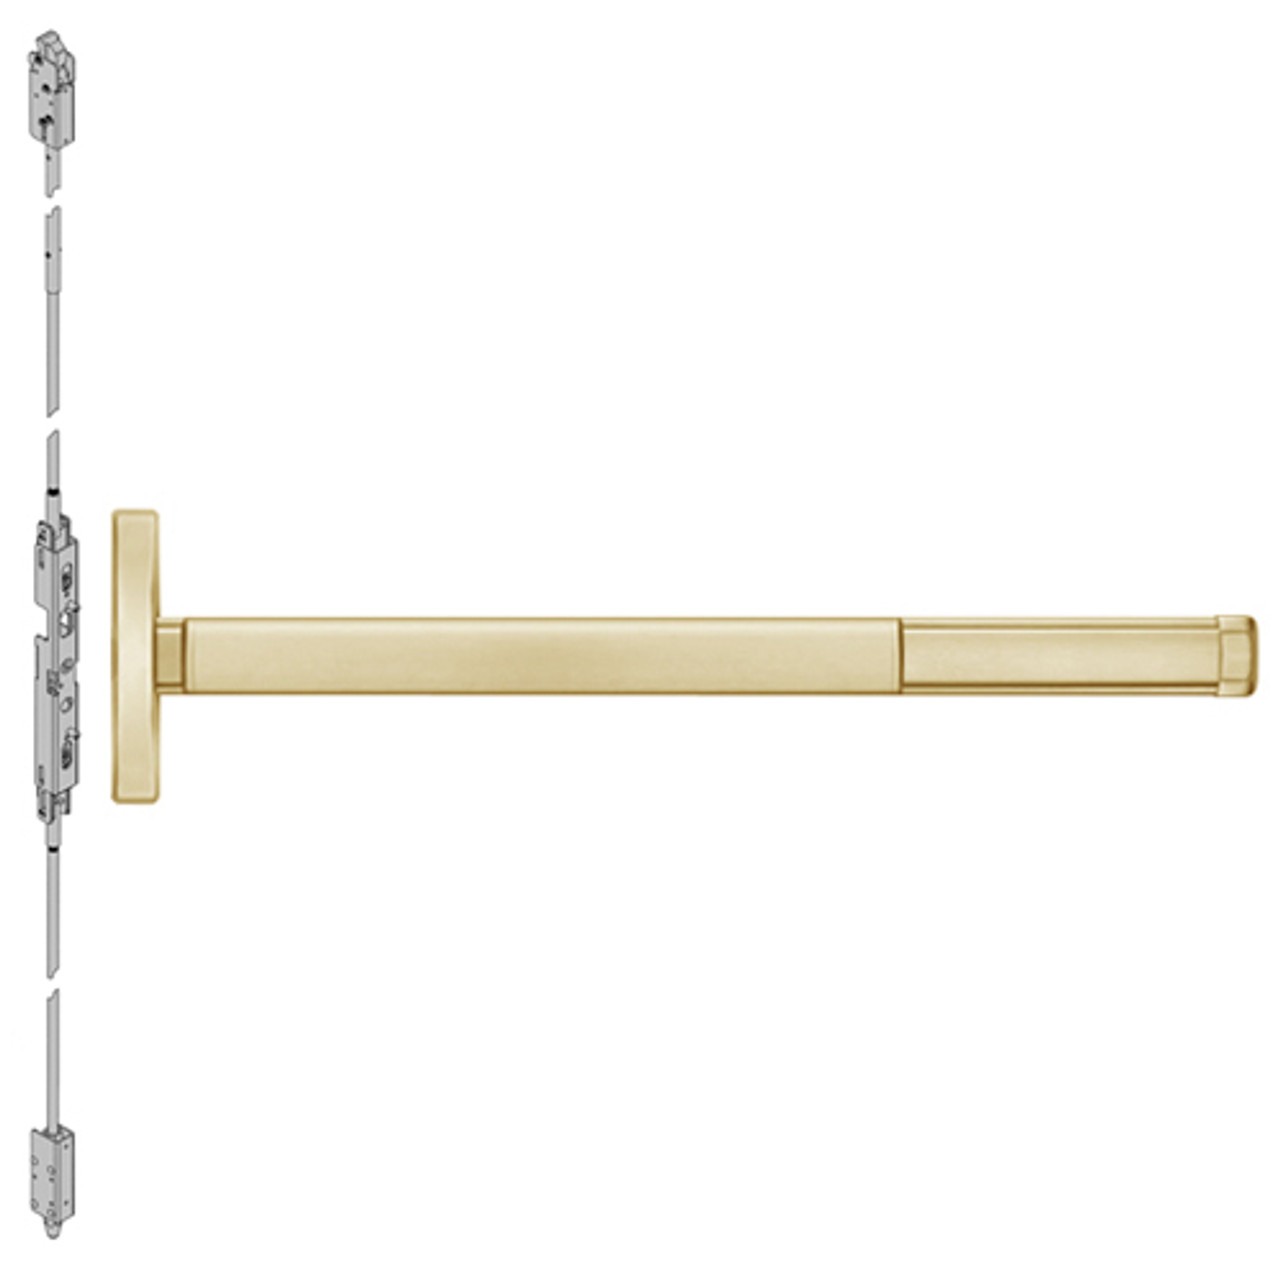 MLR2602-606-36 PHI 2600 Series Concealed Vertical Rod Exit Device with Motorized Latch Retraction Prepped for Dummy Trim in Satin Brass Finish